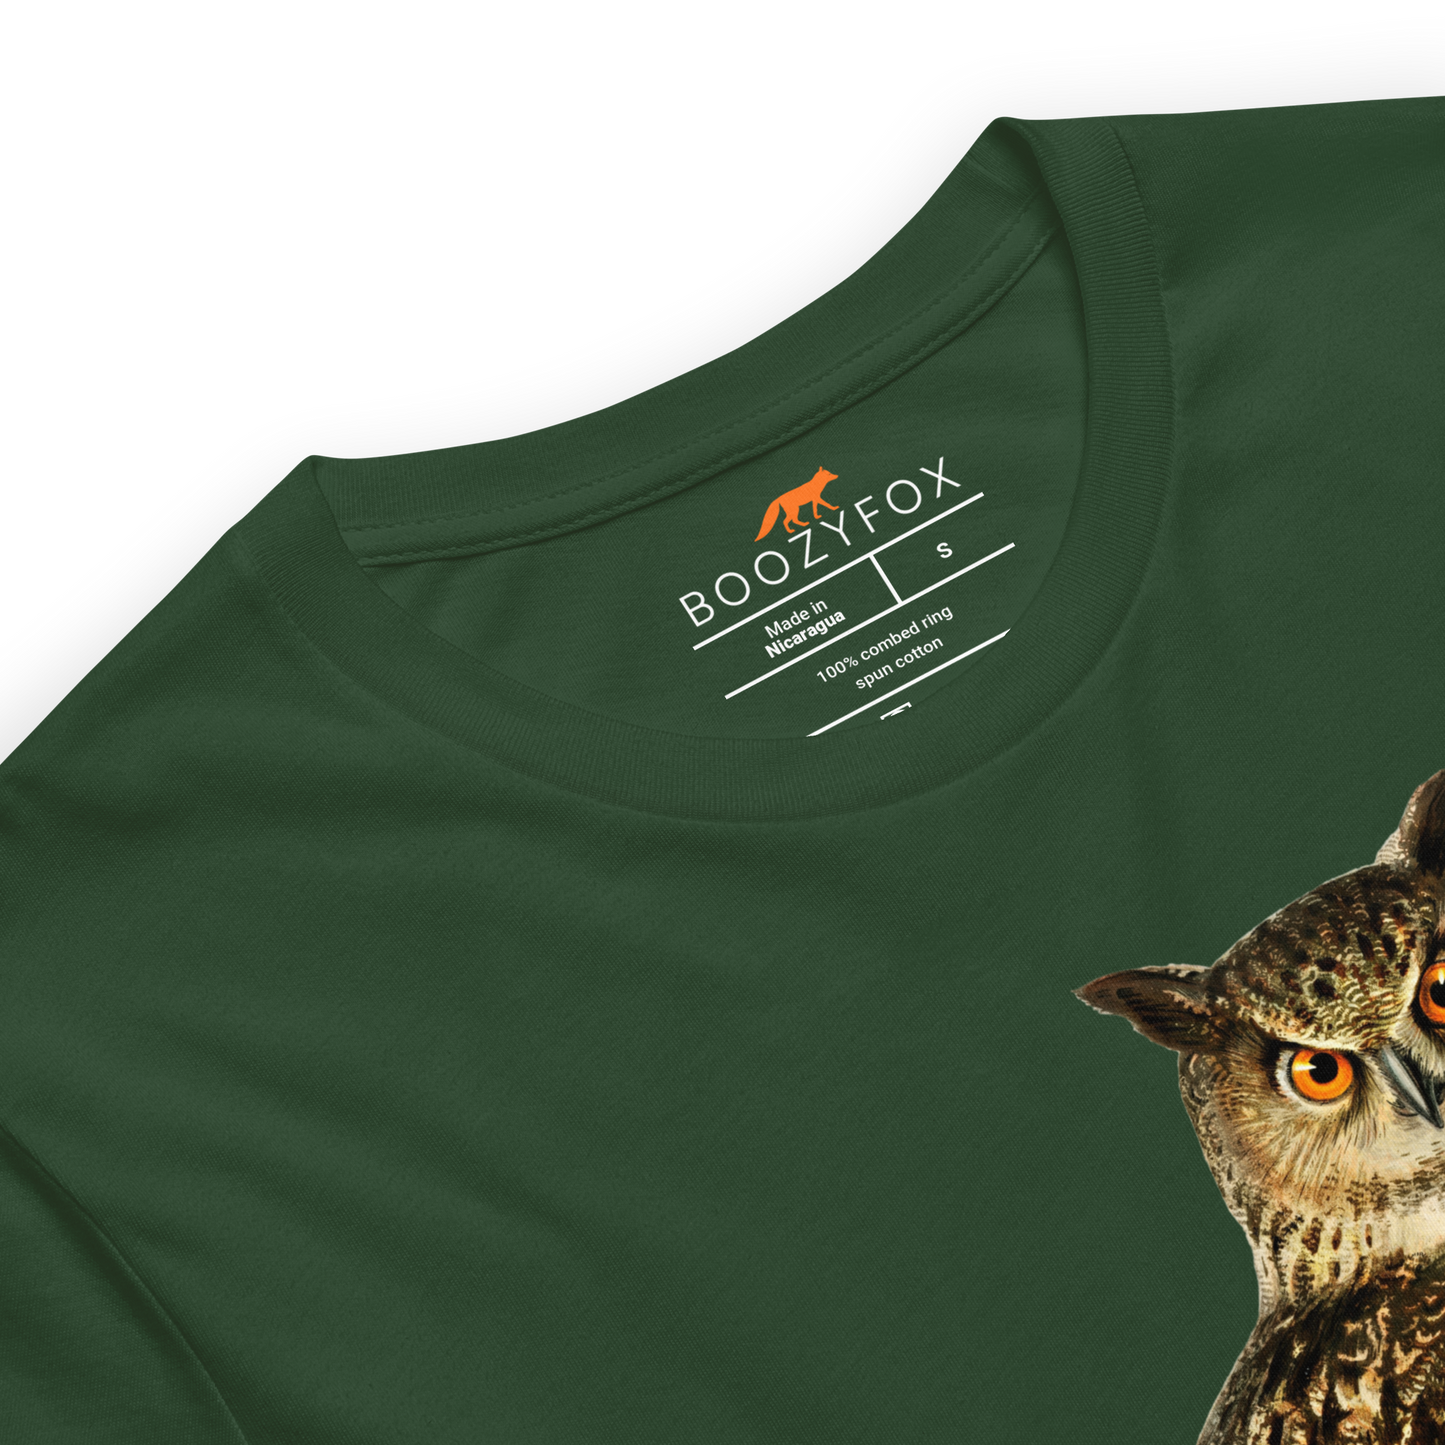 Product details of a Forest Green Premium Owl T-Shirt featuring a captivating Don't Give A Hoot graphic on the chest - Funny Graphic Owl Tees - Boozy Fox